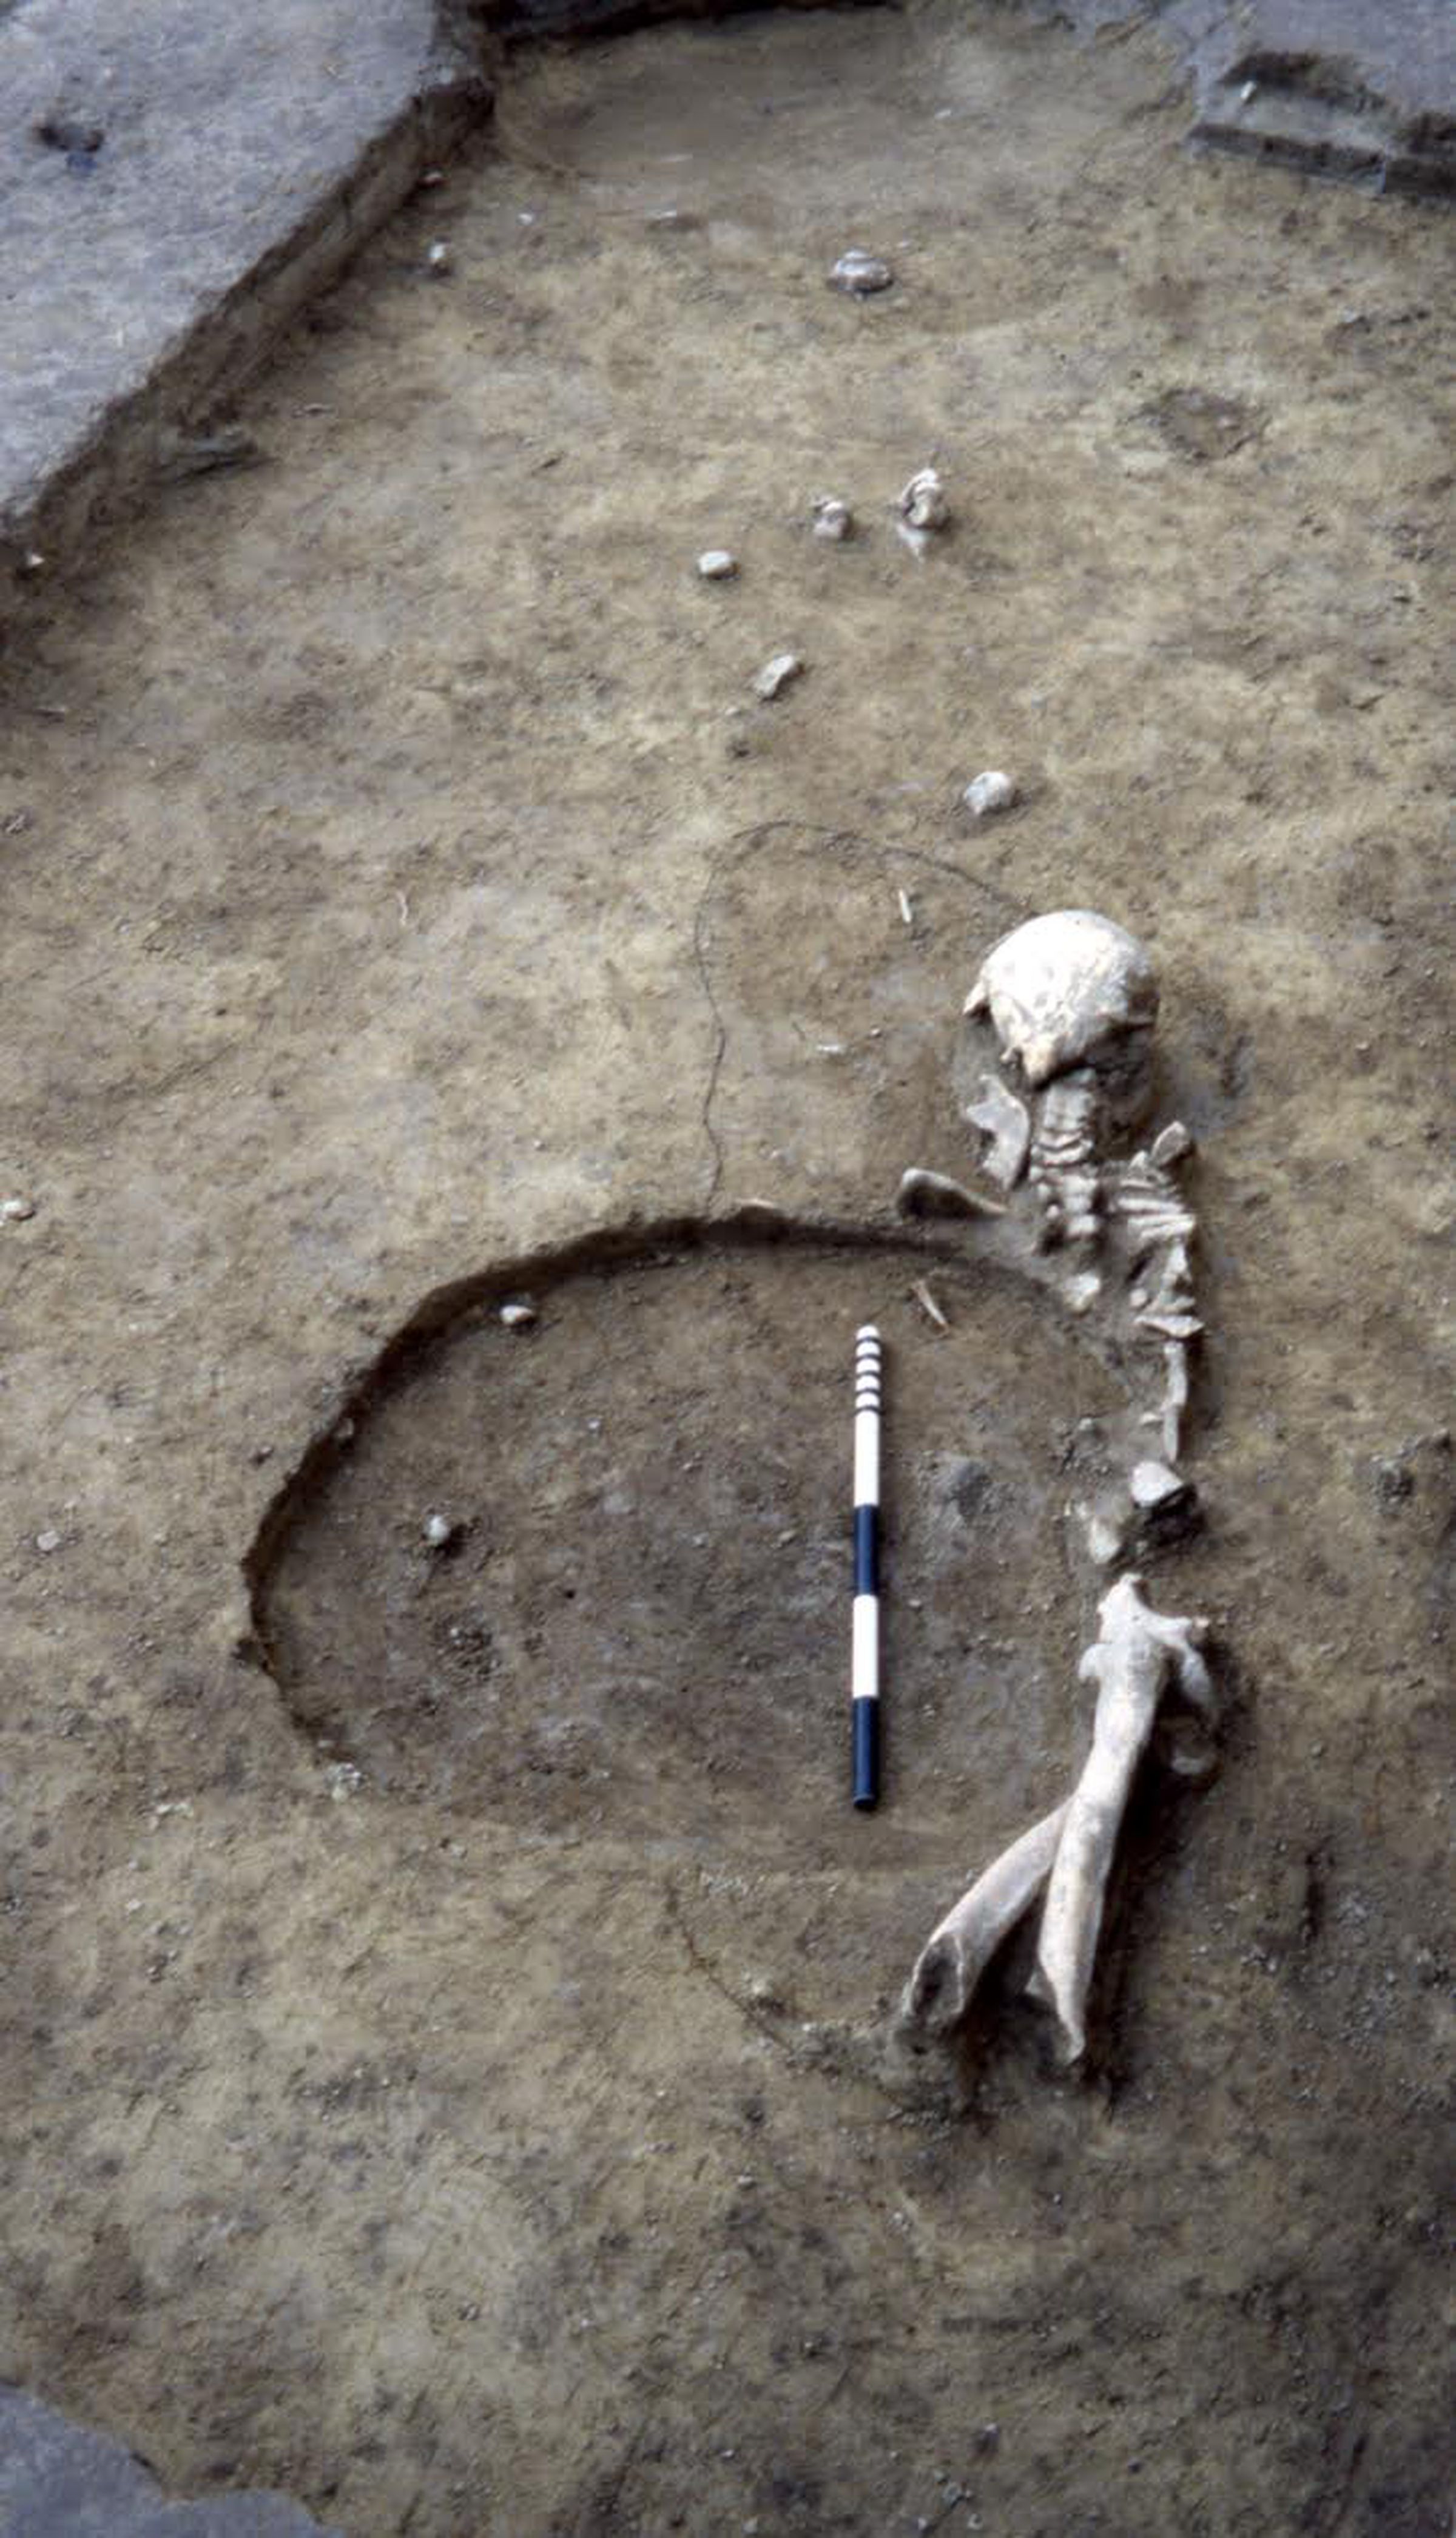 One of the skeletons analyzed in the study, a hunter-gatherer found in Romania dated to about 8,800 years ago.